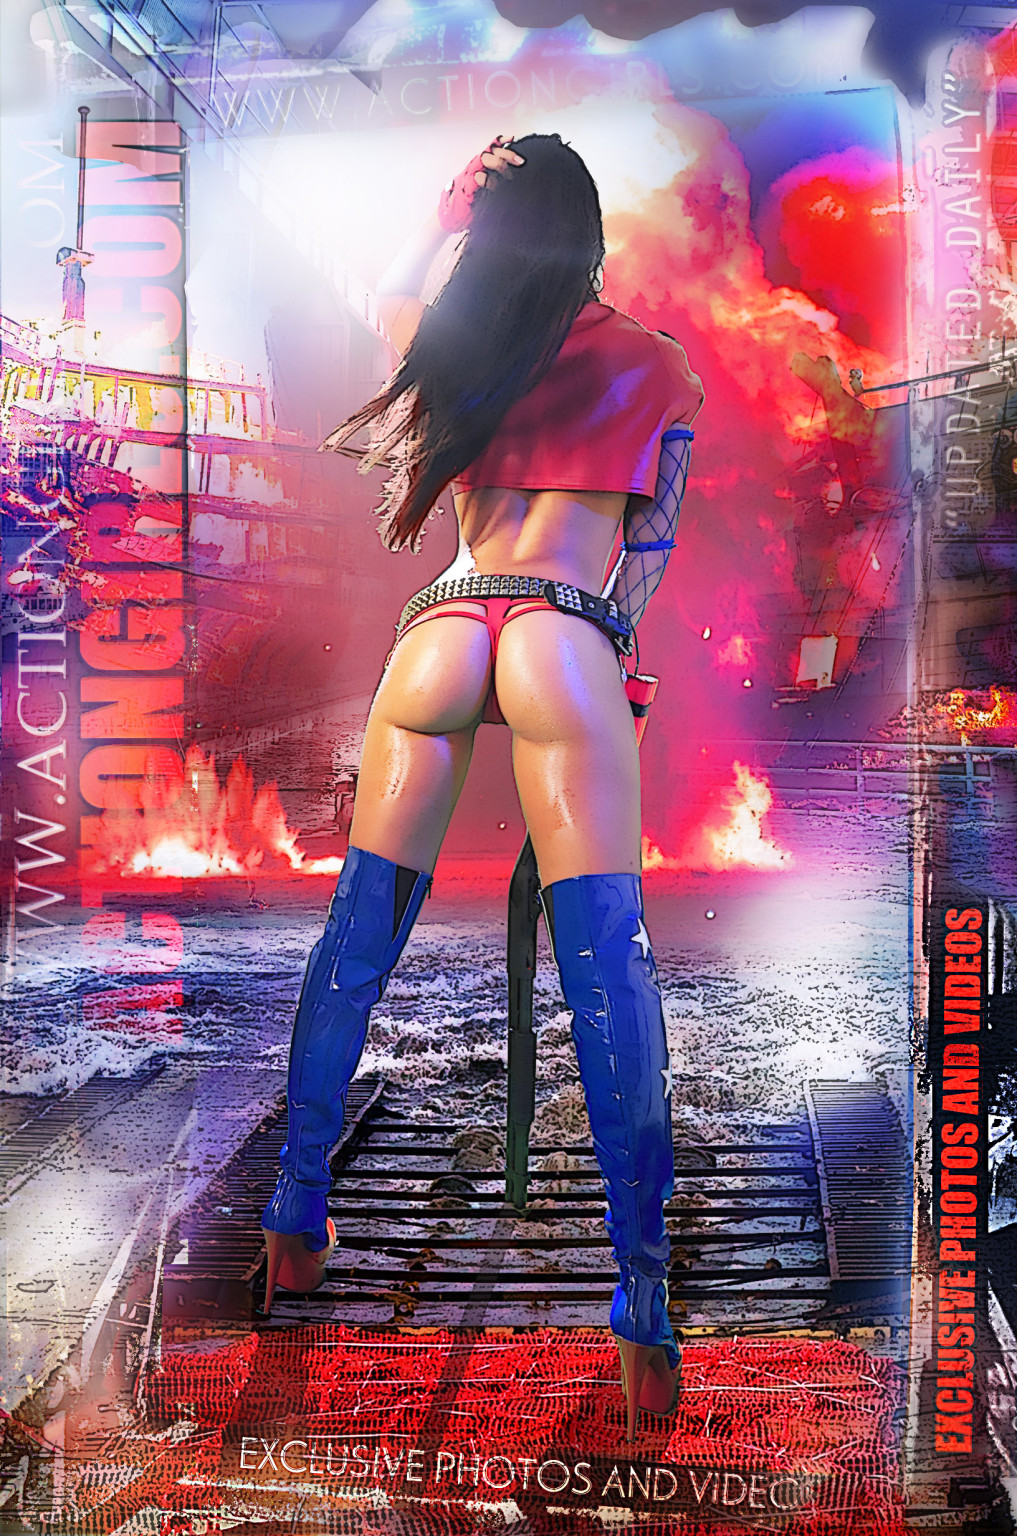 Exklusive actiongirls web-poster deluxe fotos actiongirls
 #70898367